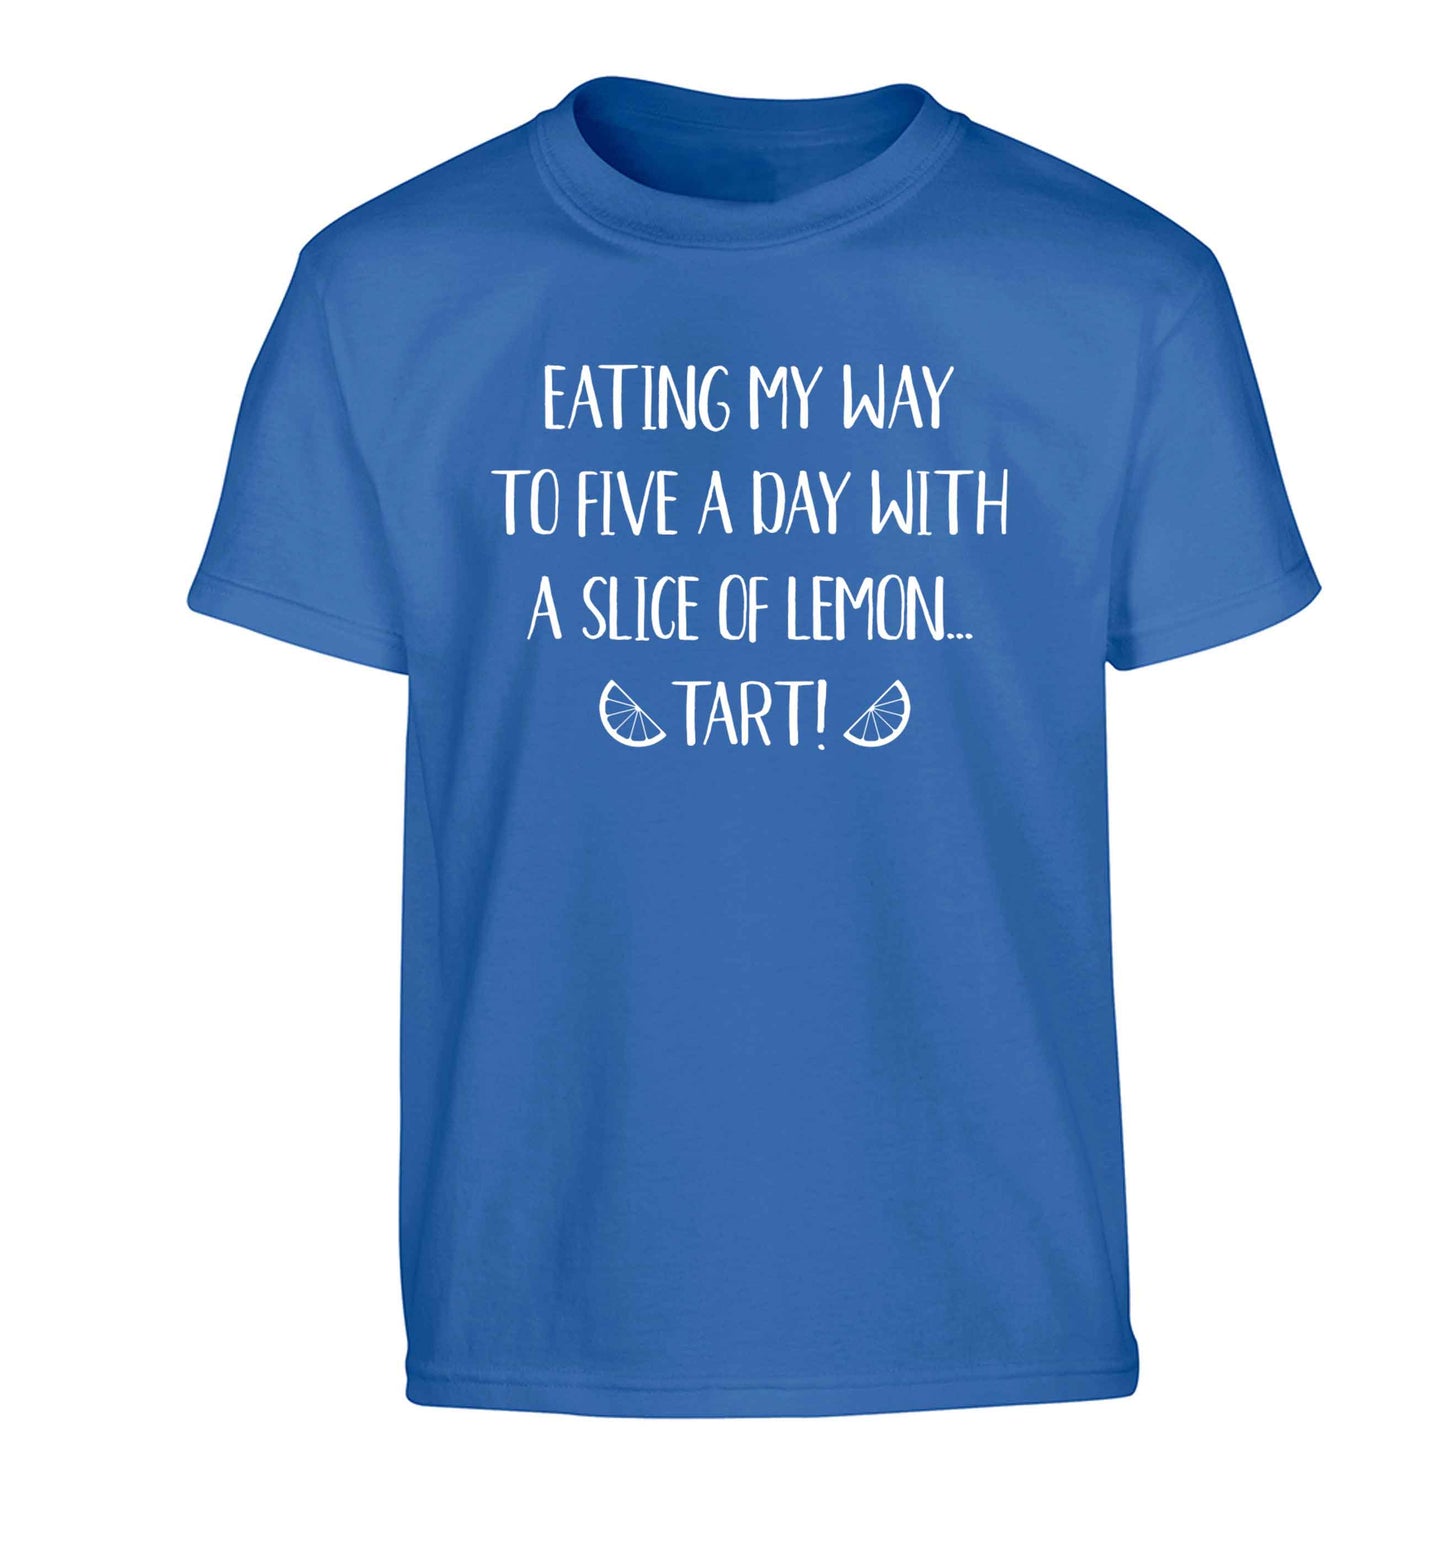 Eating my way to five a day with a slice of lemon tart Children's blue Tshirt 12-13 Years